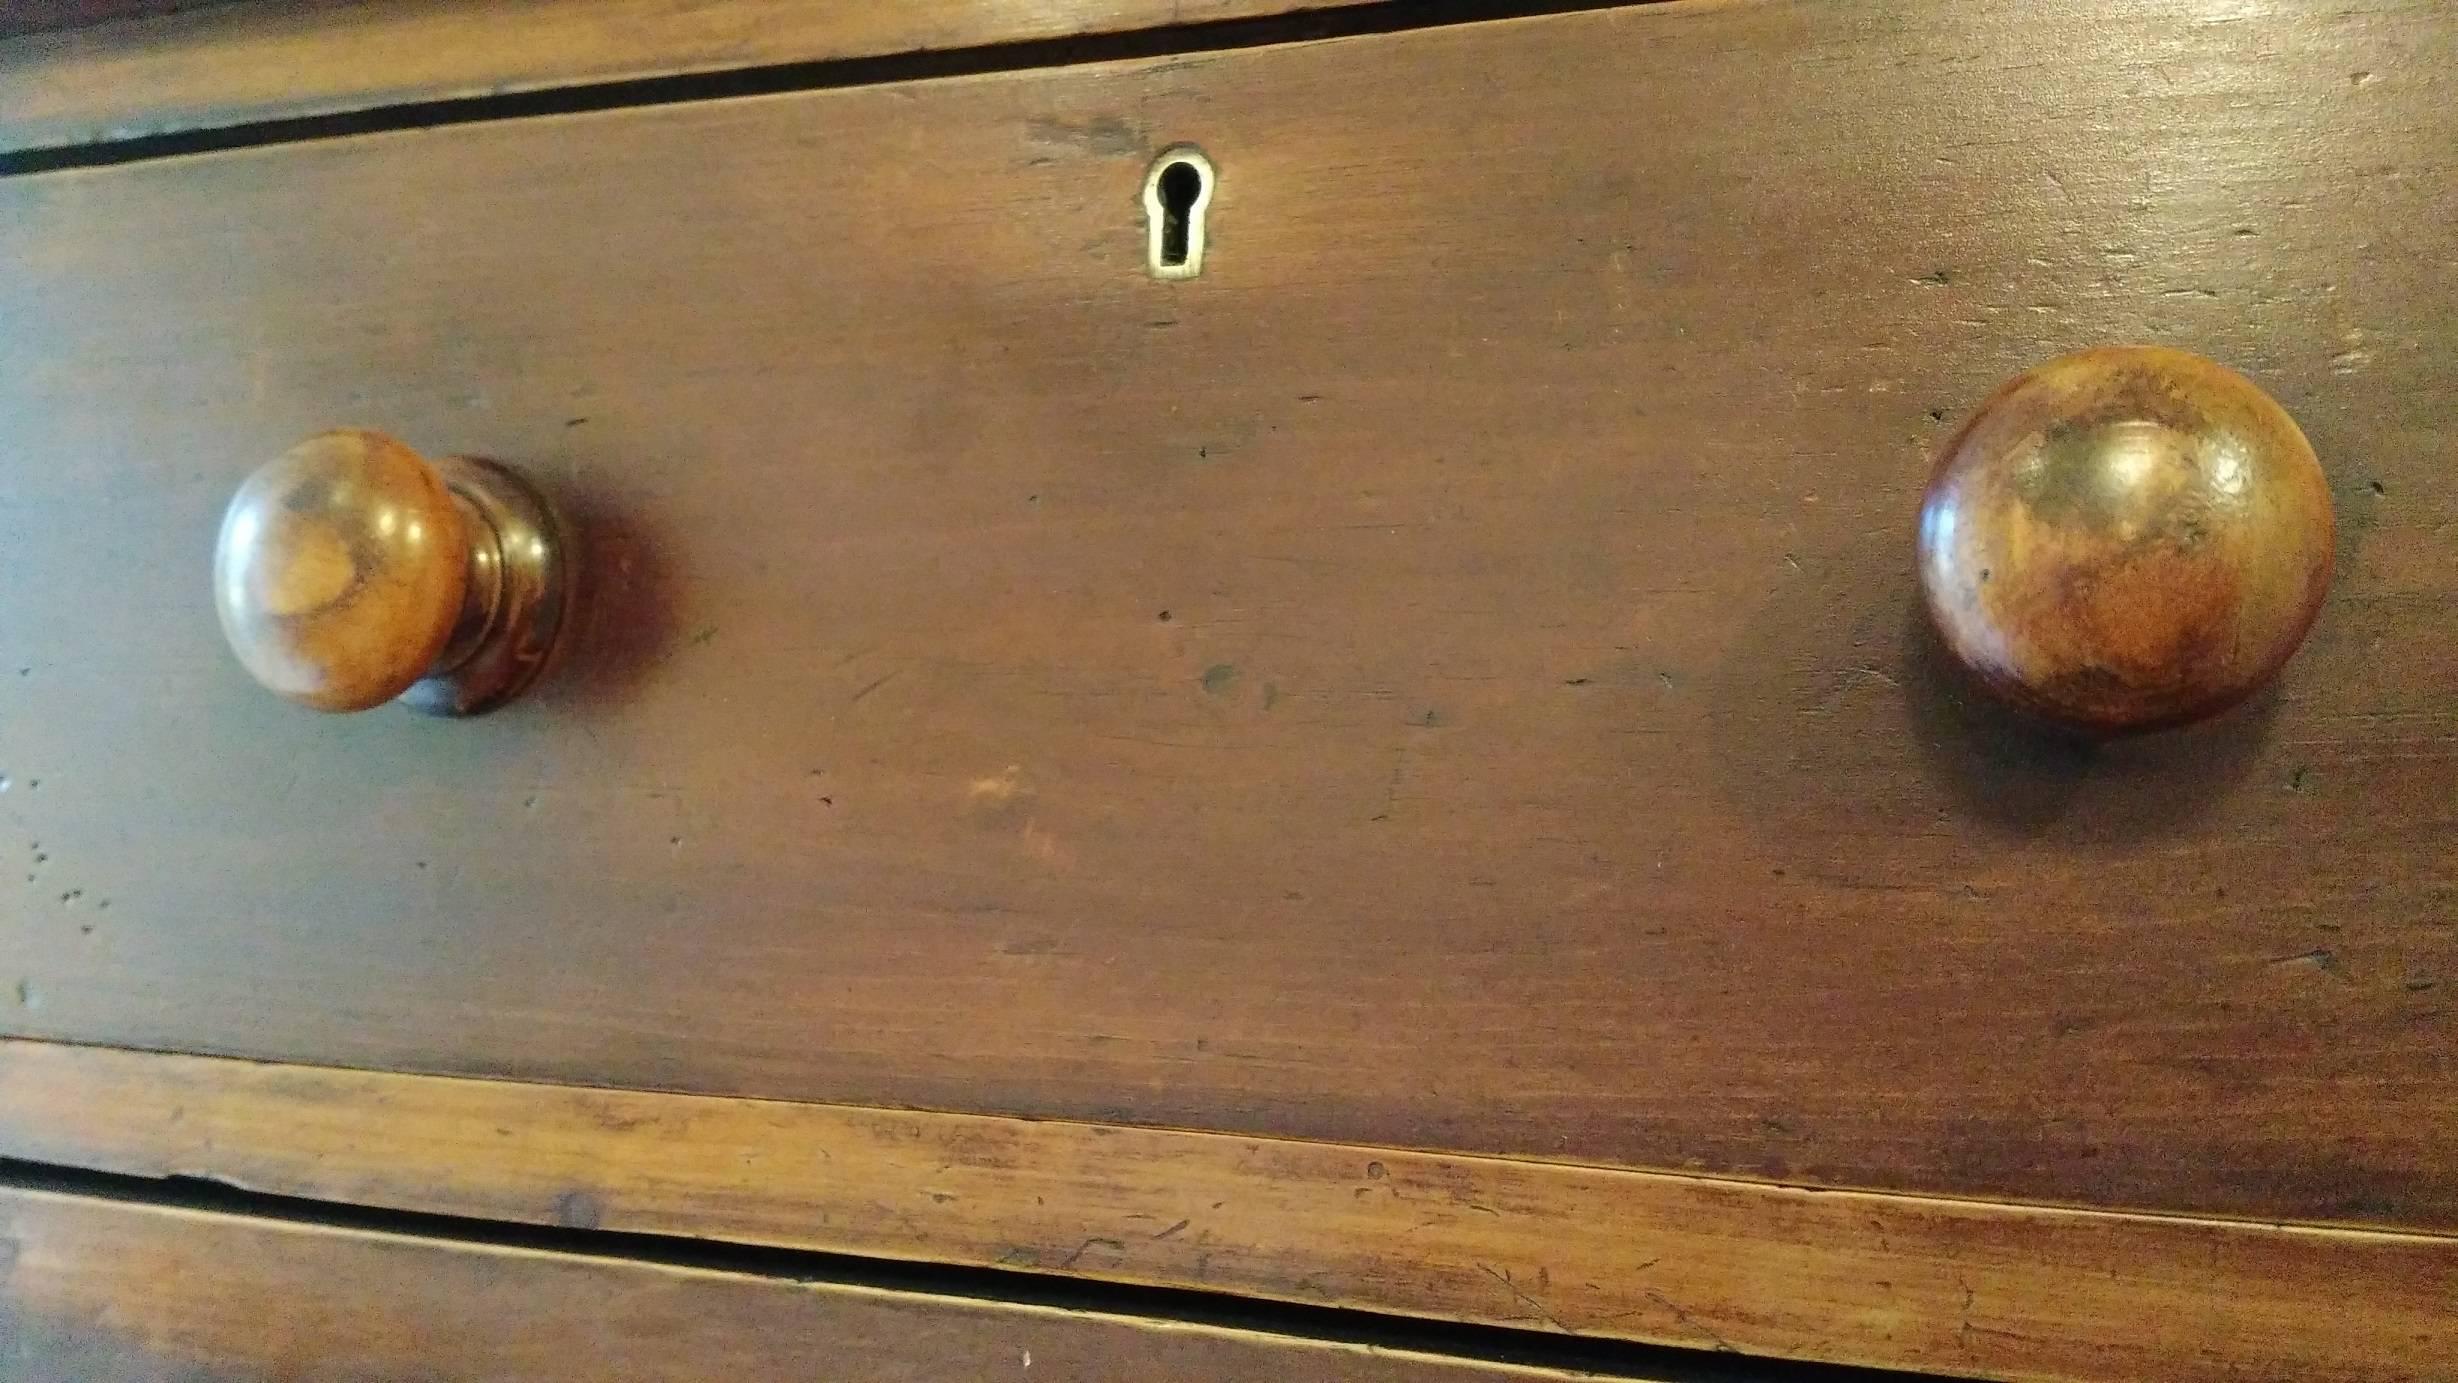 Rich chocolate brown wood and original knobs adorn this extremely nice sized chest of drawers. It's an eye catcher and extremely useful at the same time. Check the dimensions as they are quite pleasing. If you have the right small wall this piece